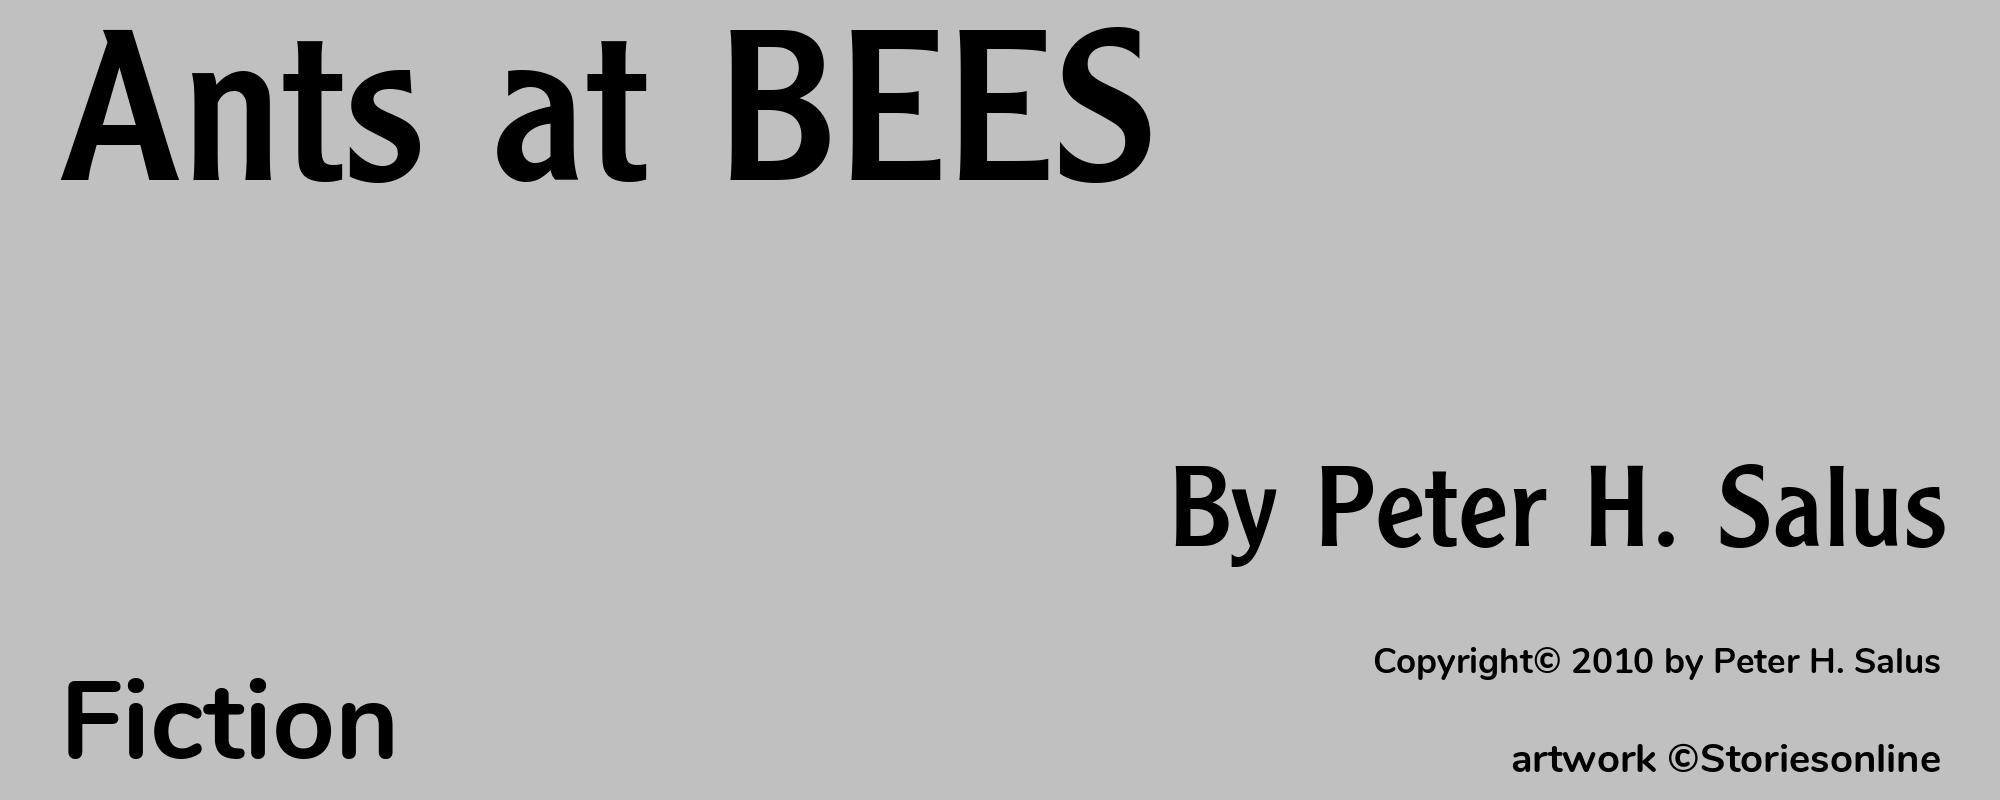 Ants at BEES - Cover